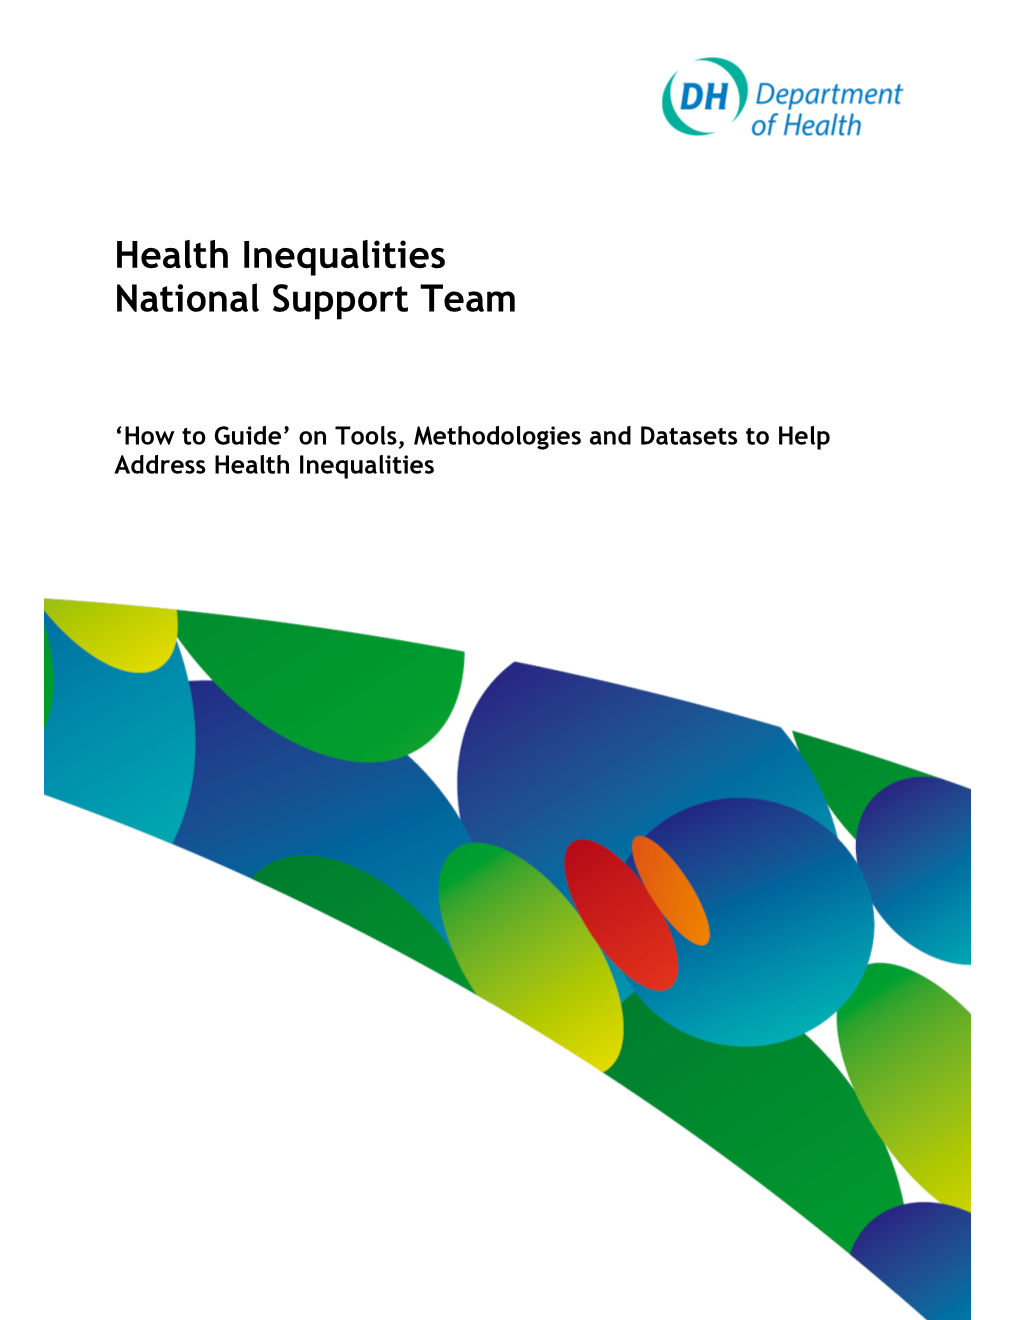 Health Inequalities National Support Team